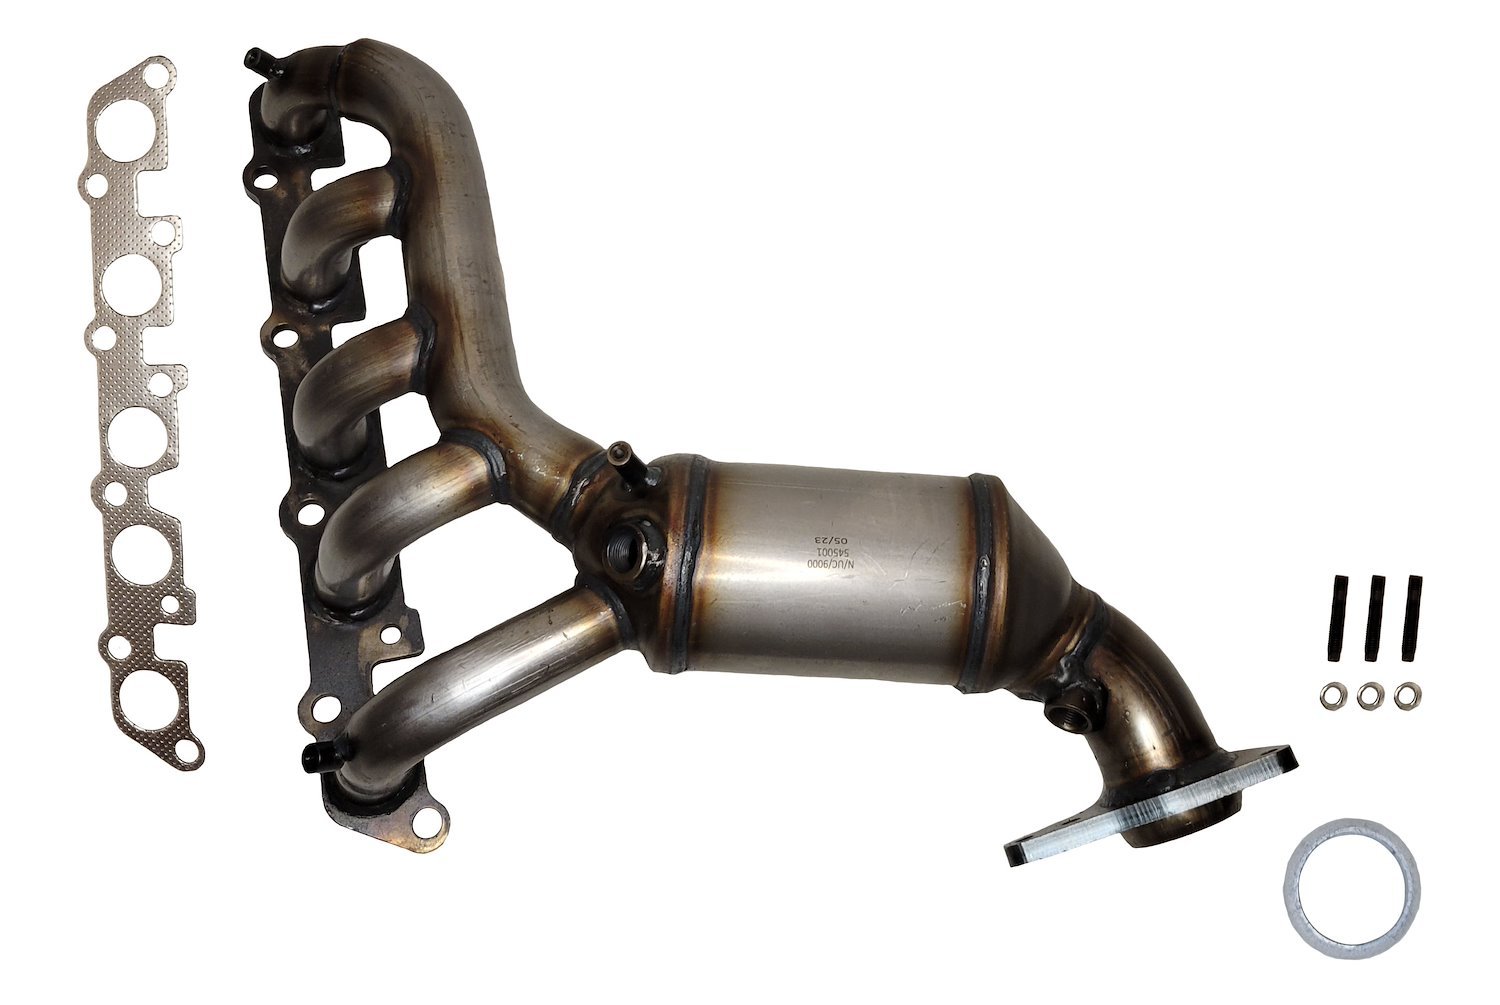 Catalytic Converter Fits 2010-2012 Chevrolet Colorado, 2007-2008 Hummer H3 & Isuzu i-370 w/3.5L I5 cyl. Eng. [Front]